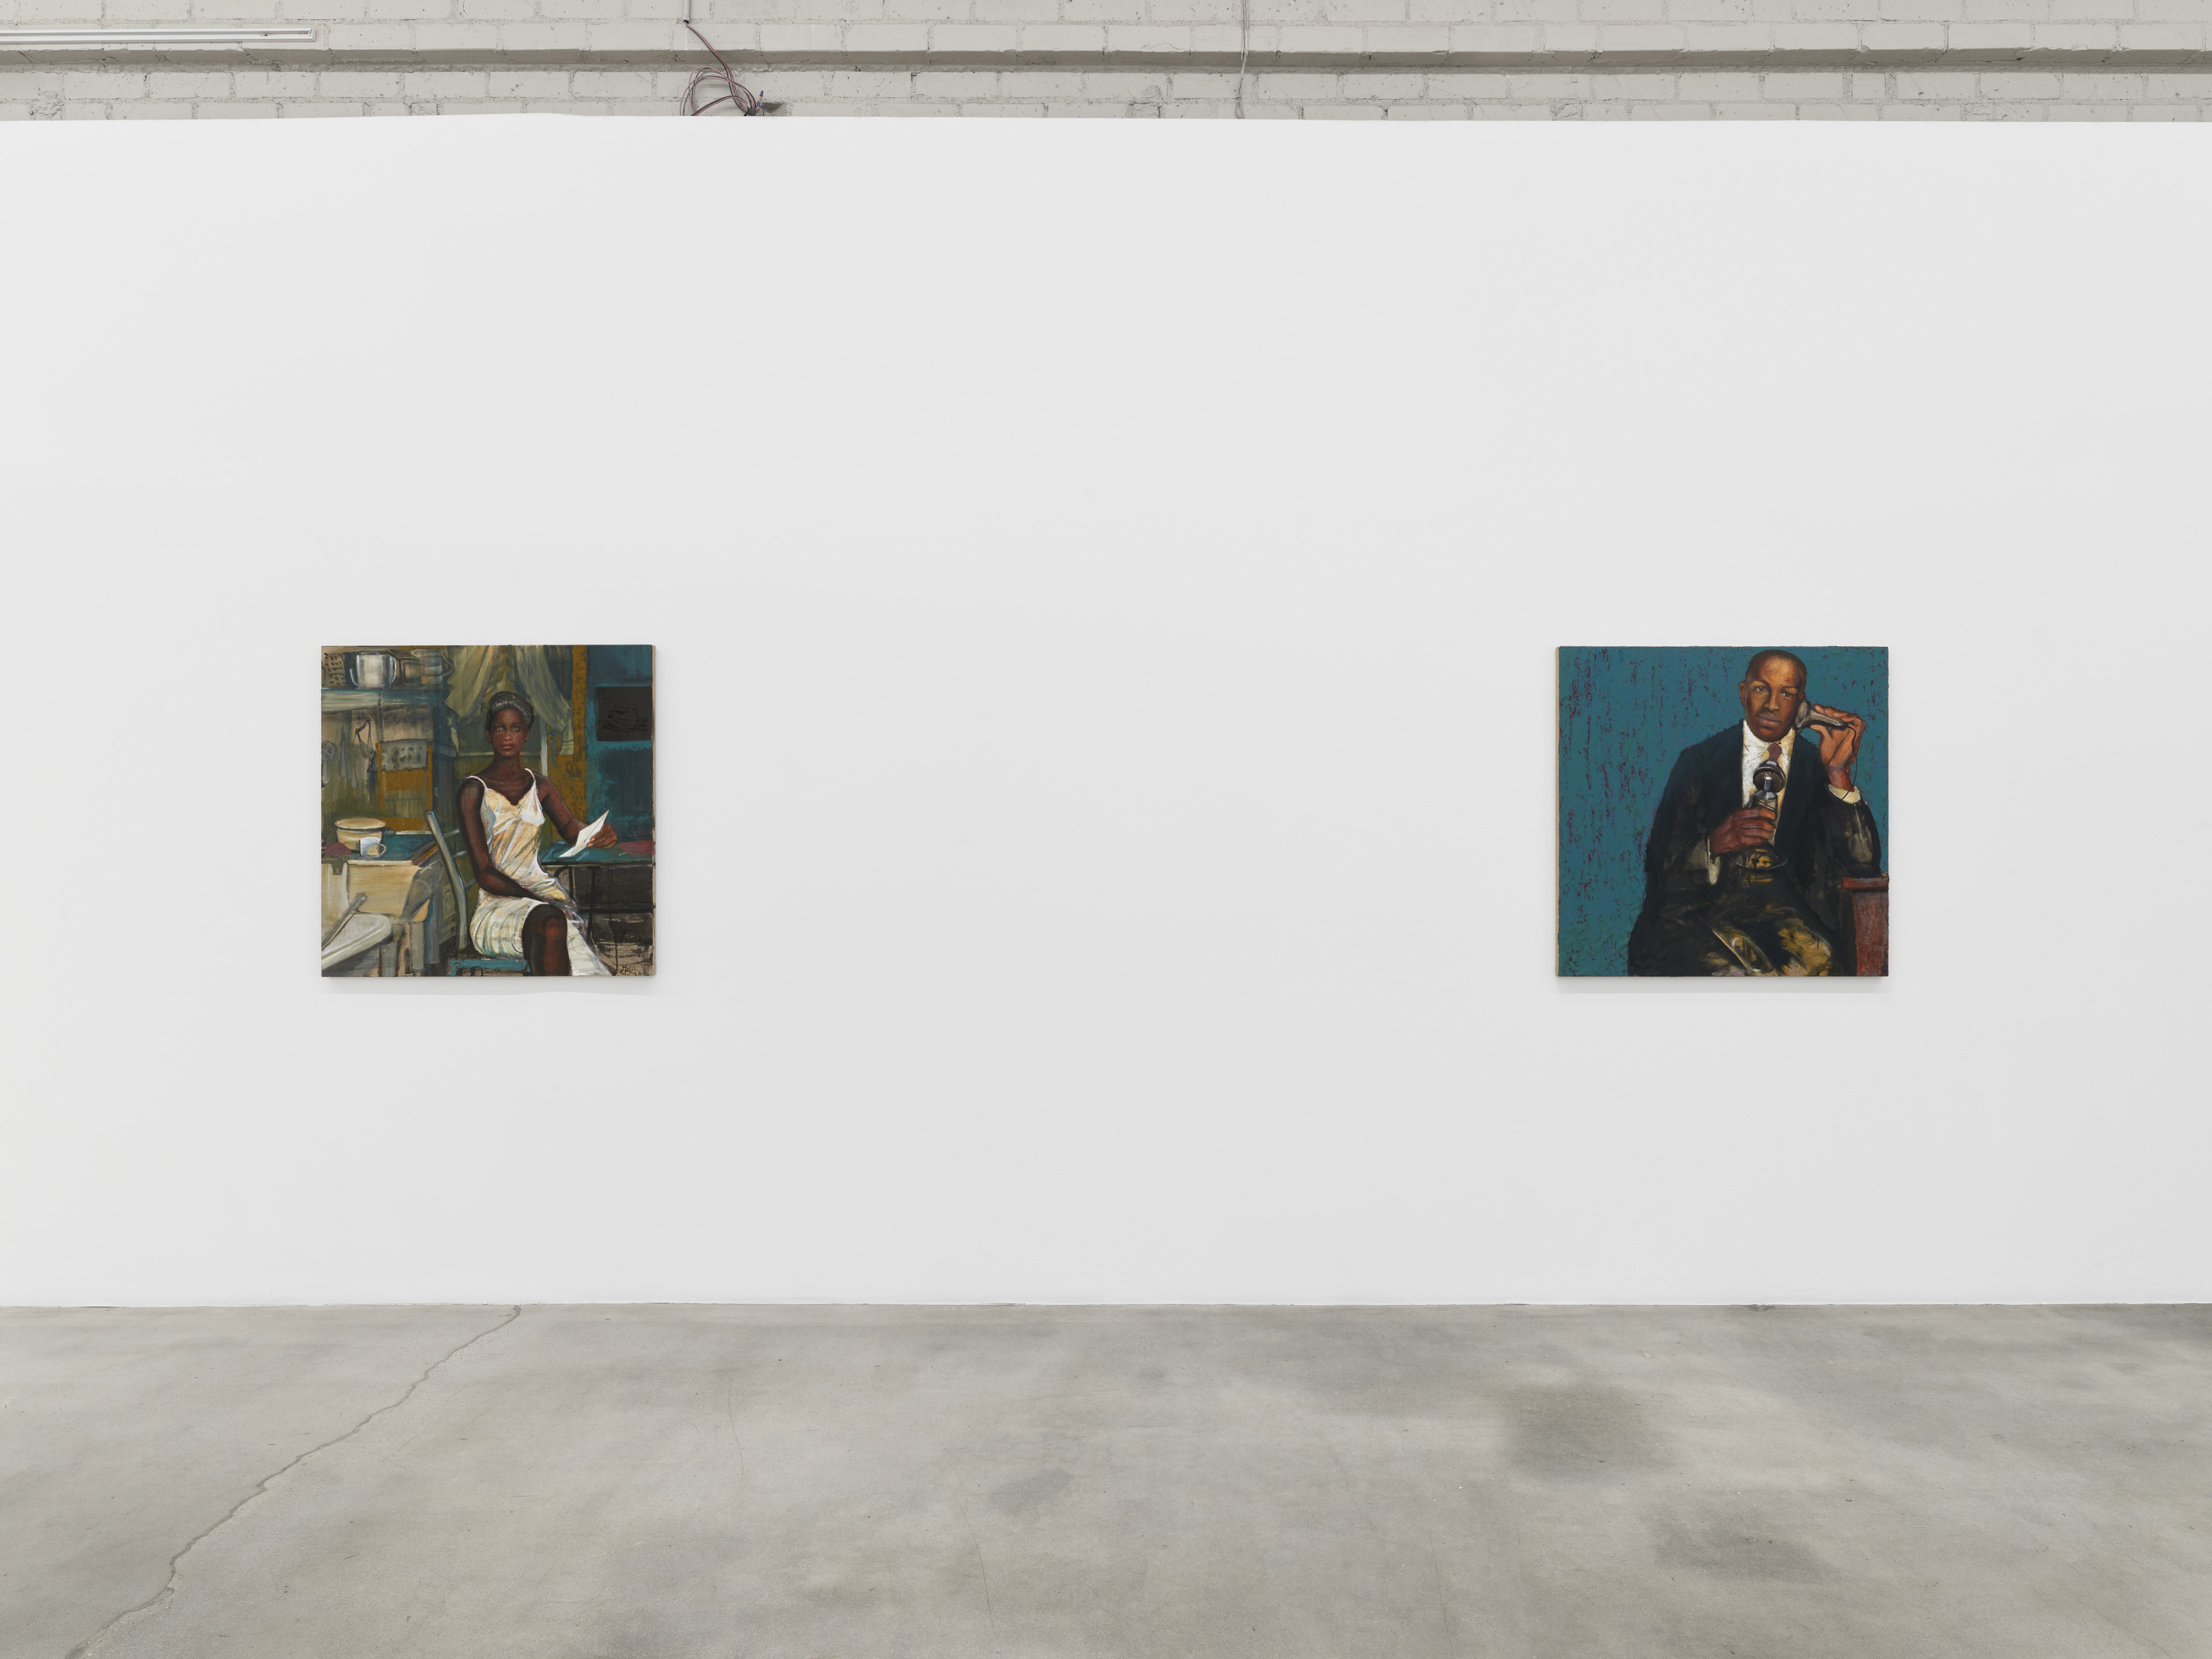 Chaz Guest, Gaining Pride with Promises Broken, installation view, 2022